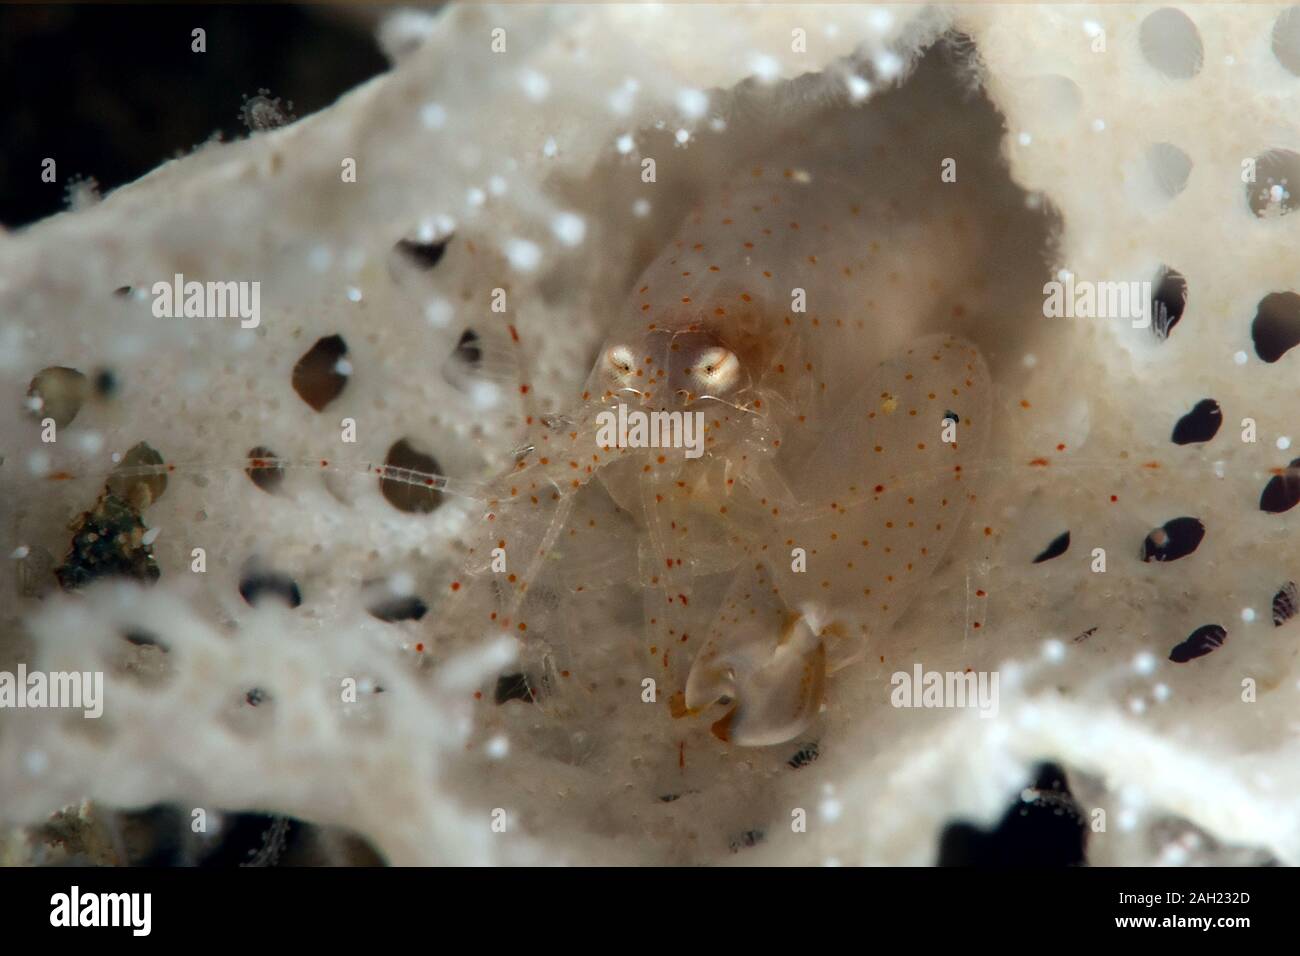 Bryozoan Snapping Shrimp. Picture was taken in Ambon, Indonesia Stock Photo